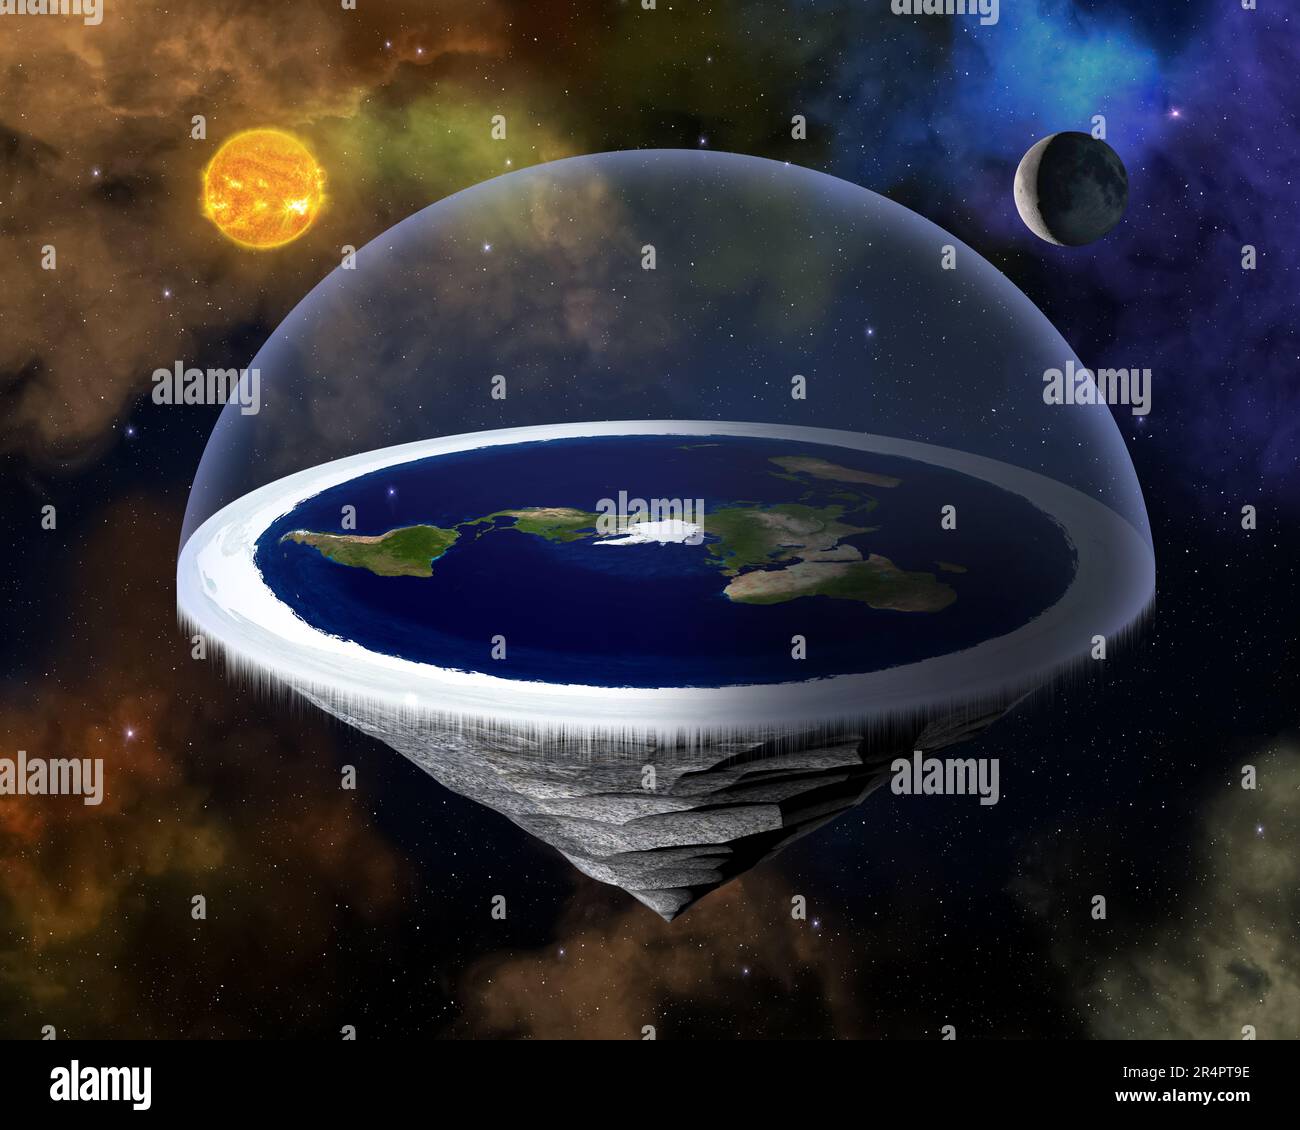 Flat Earth in space with sun and moon. The flat Earth model is an archaic conception of Earth's shape as a plane or disk. Elements furnished by NASA. Stock Photo